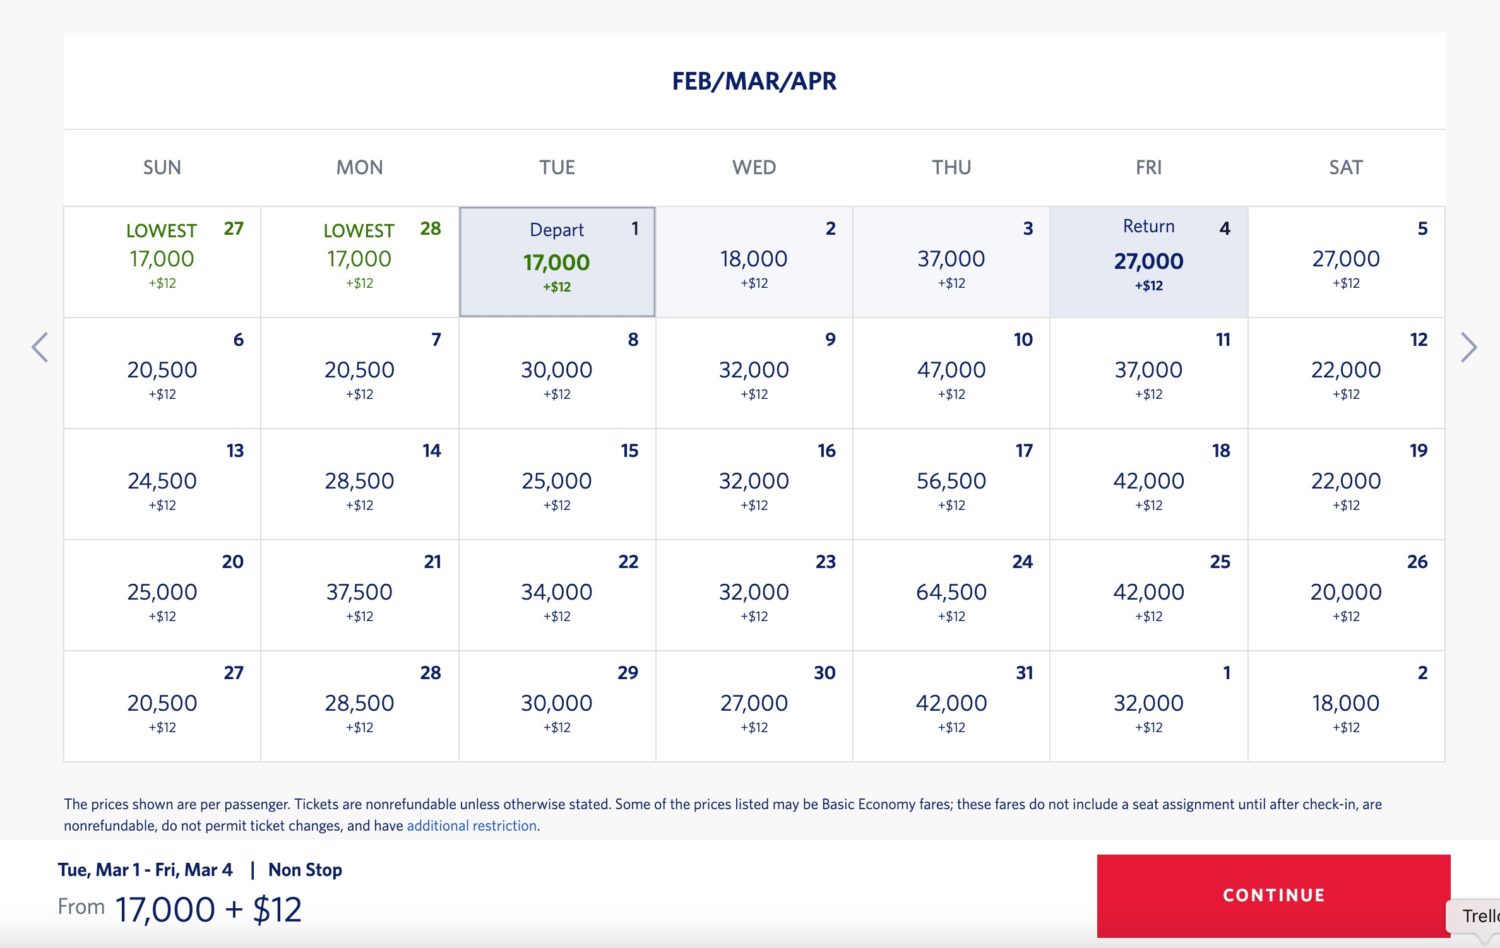 Delta SkyMiles Value How Much Are Delta Miles Worth?